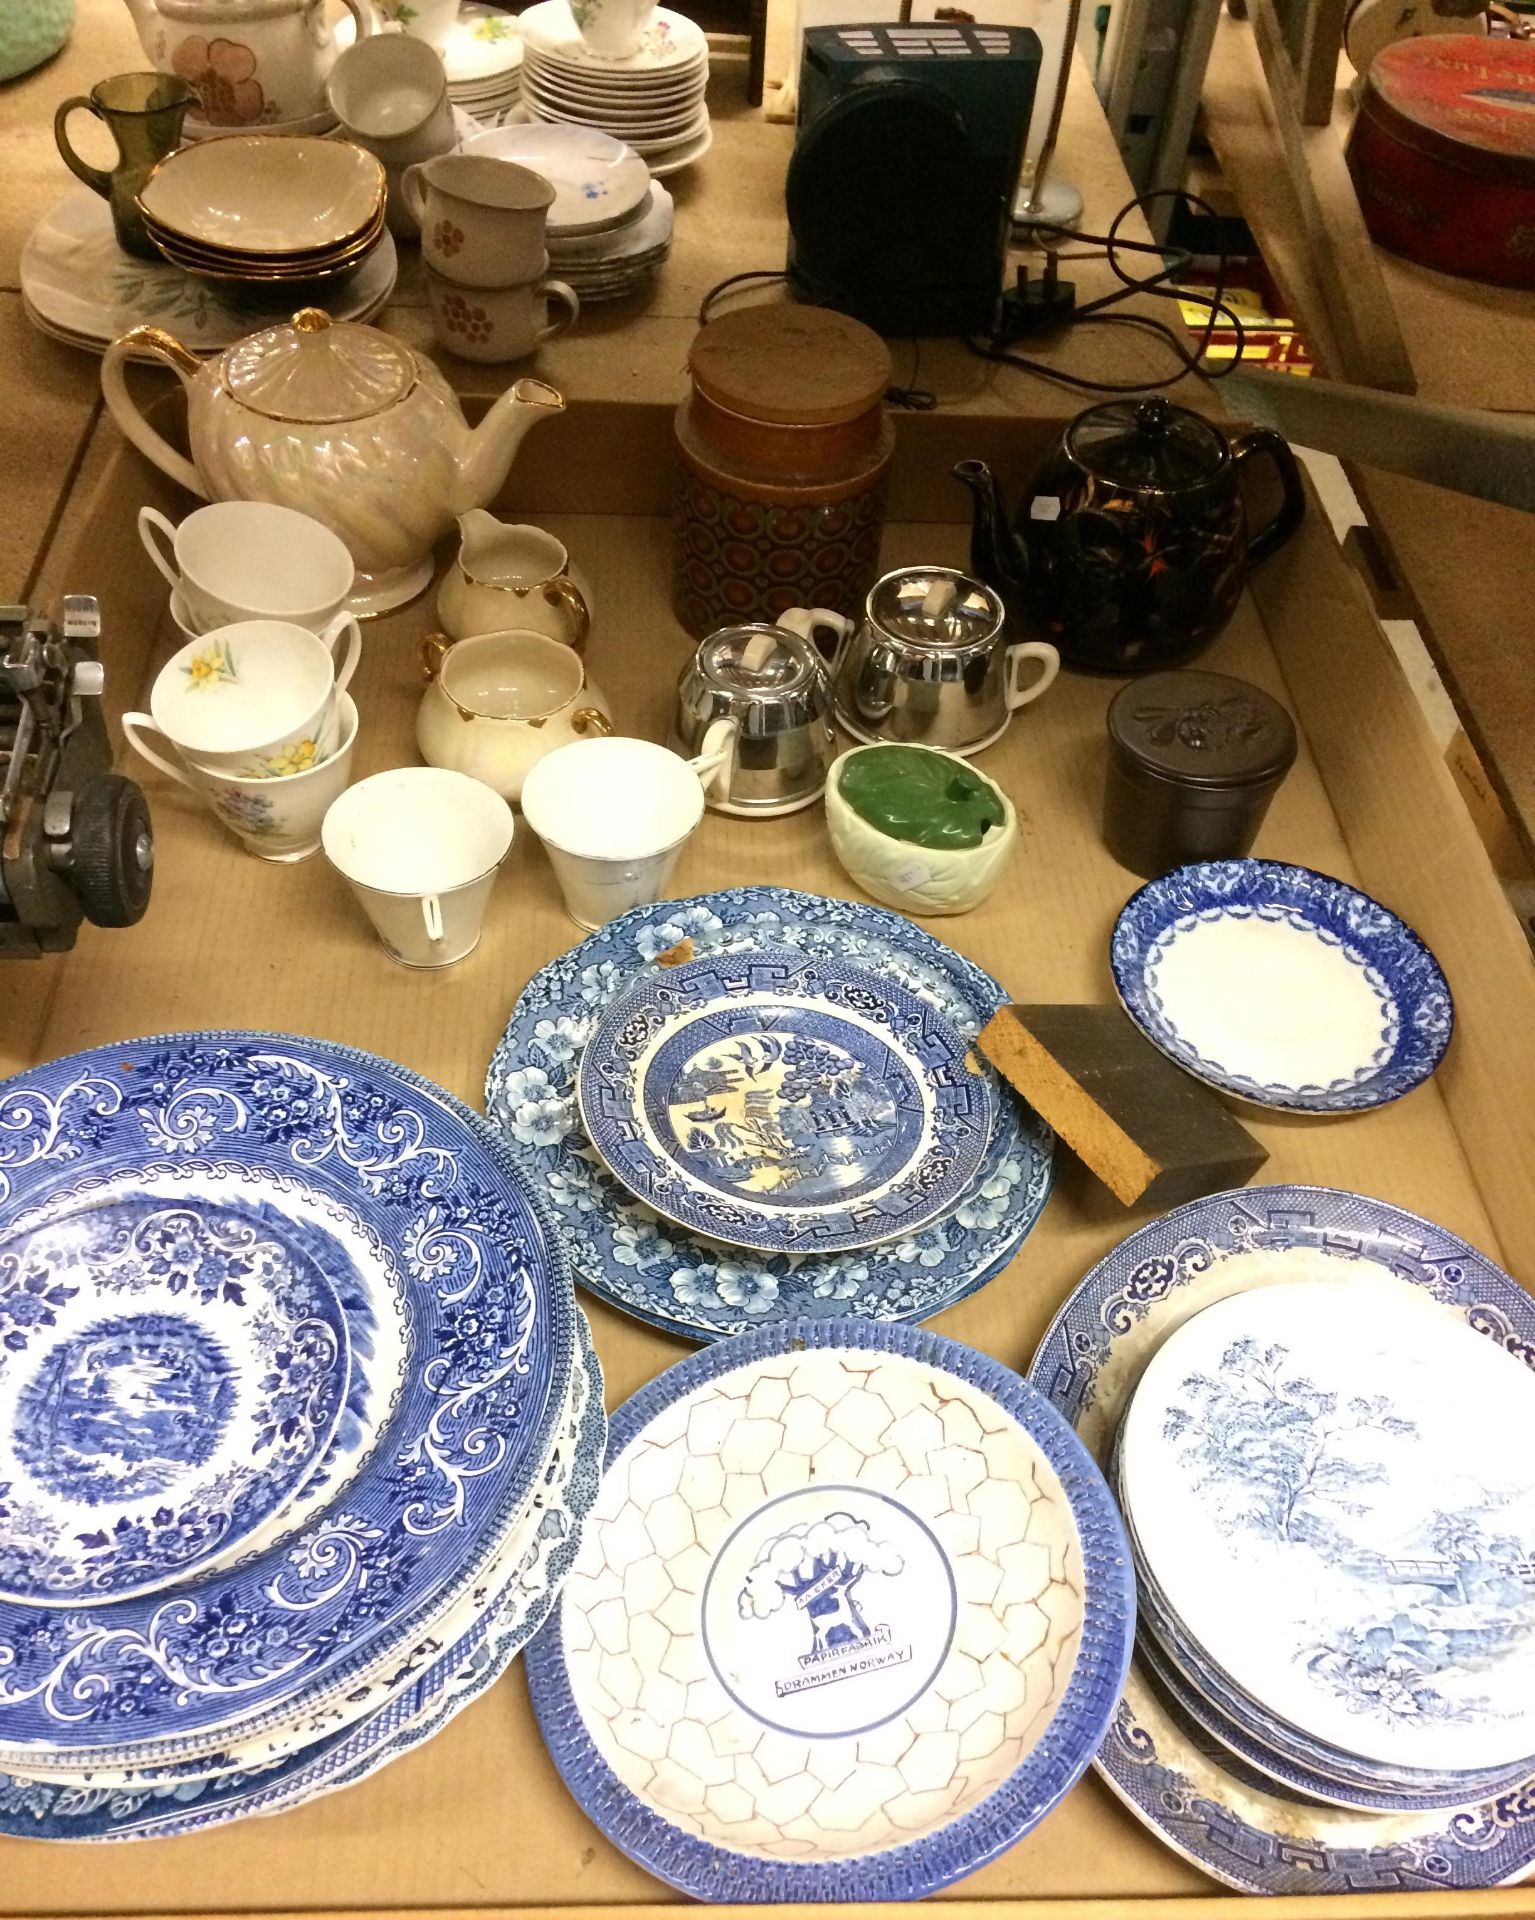 Contents to tray - assorted tableware, teapots, various willow pattern plates,